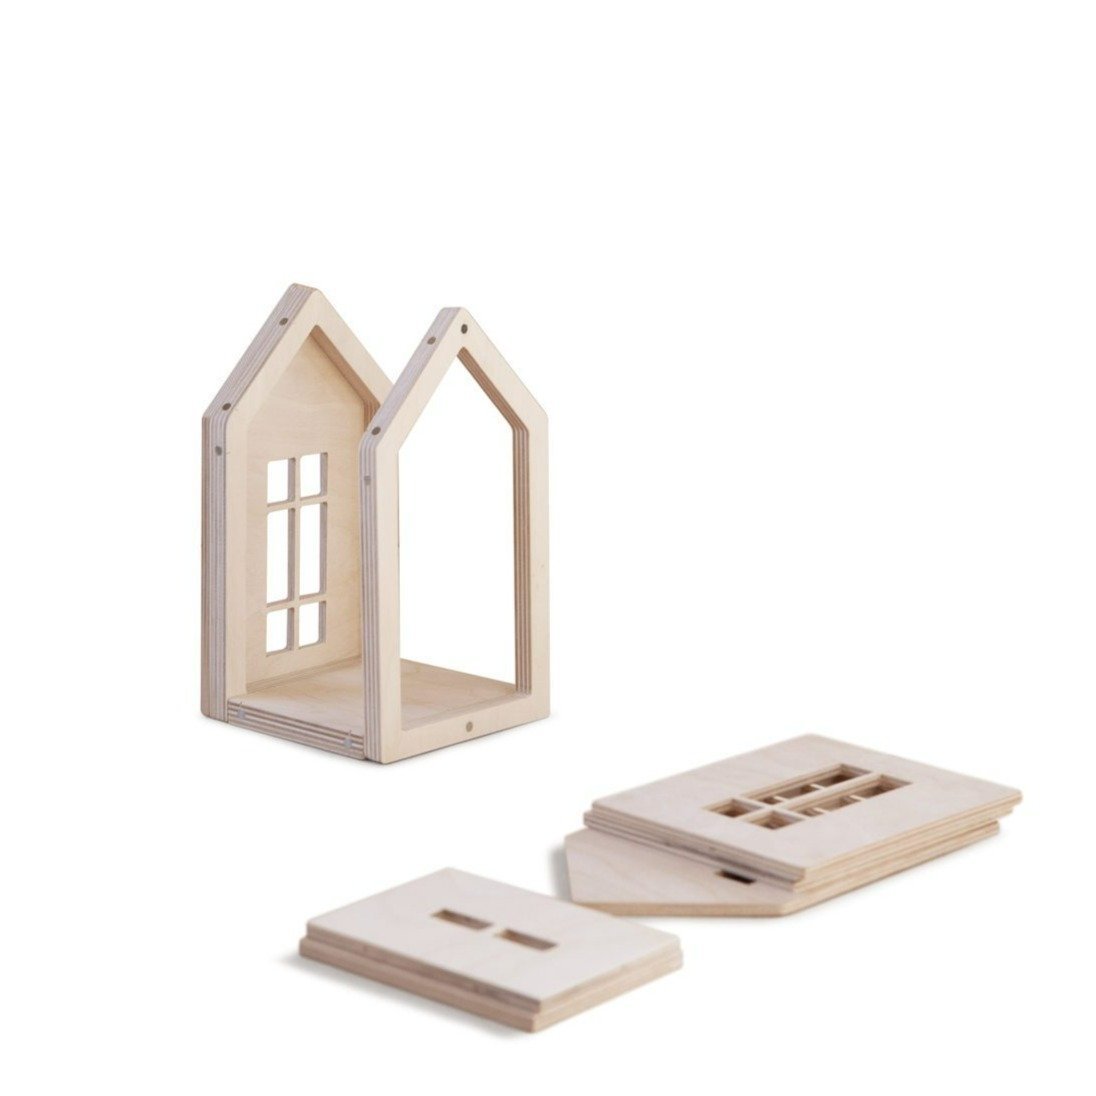 Medium Wooden Dollhouse With Magnets - Natural | Babai | Toys - Bee Like Kids